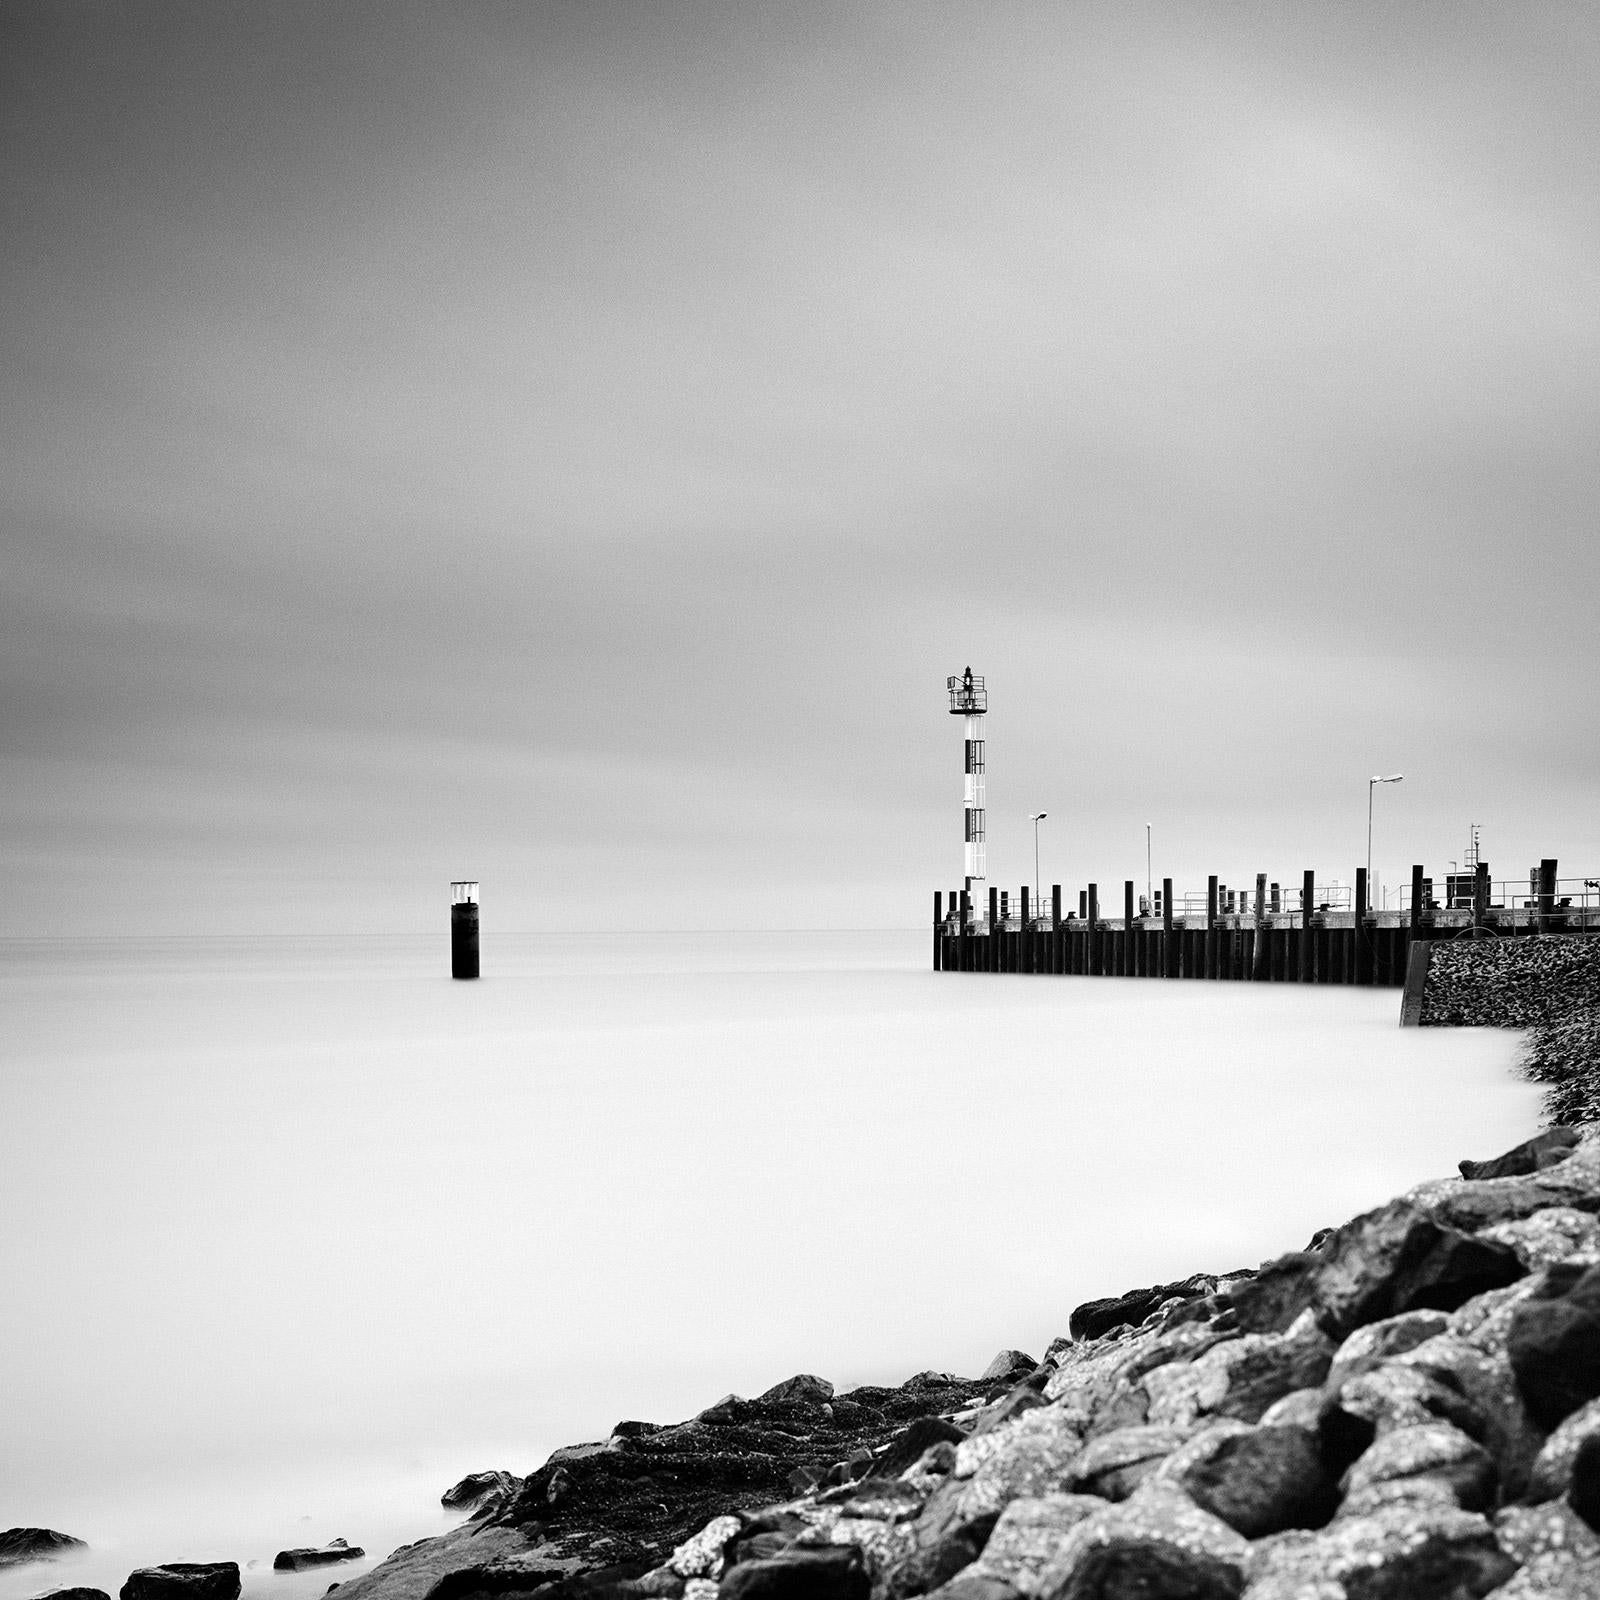 Port List, Sylt, North Sea, Germany, black and white photography, landscape